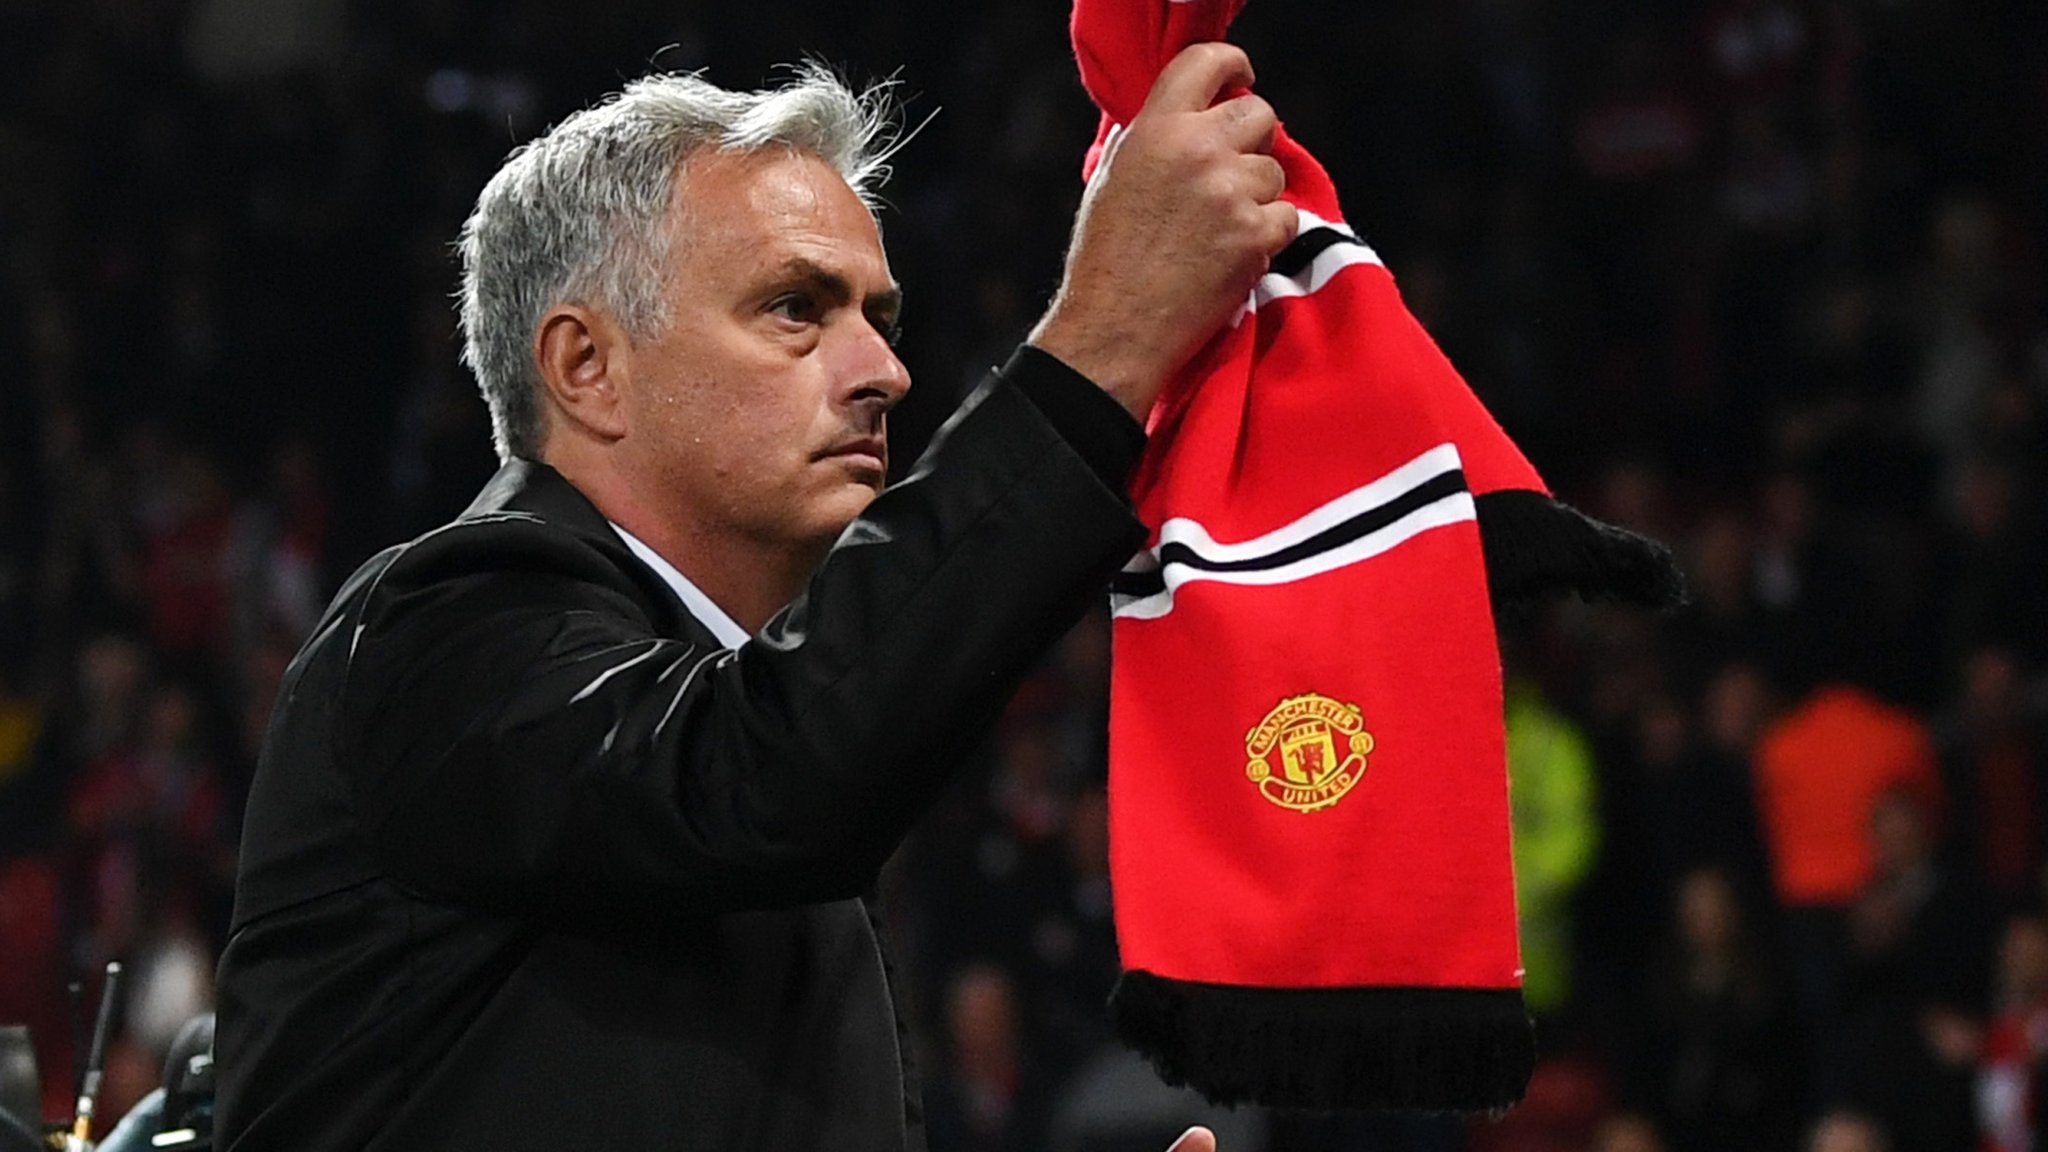 Man Utd: Why is Jose Mourinho so angry with the media?